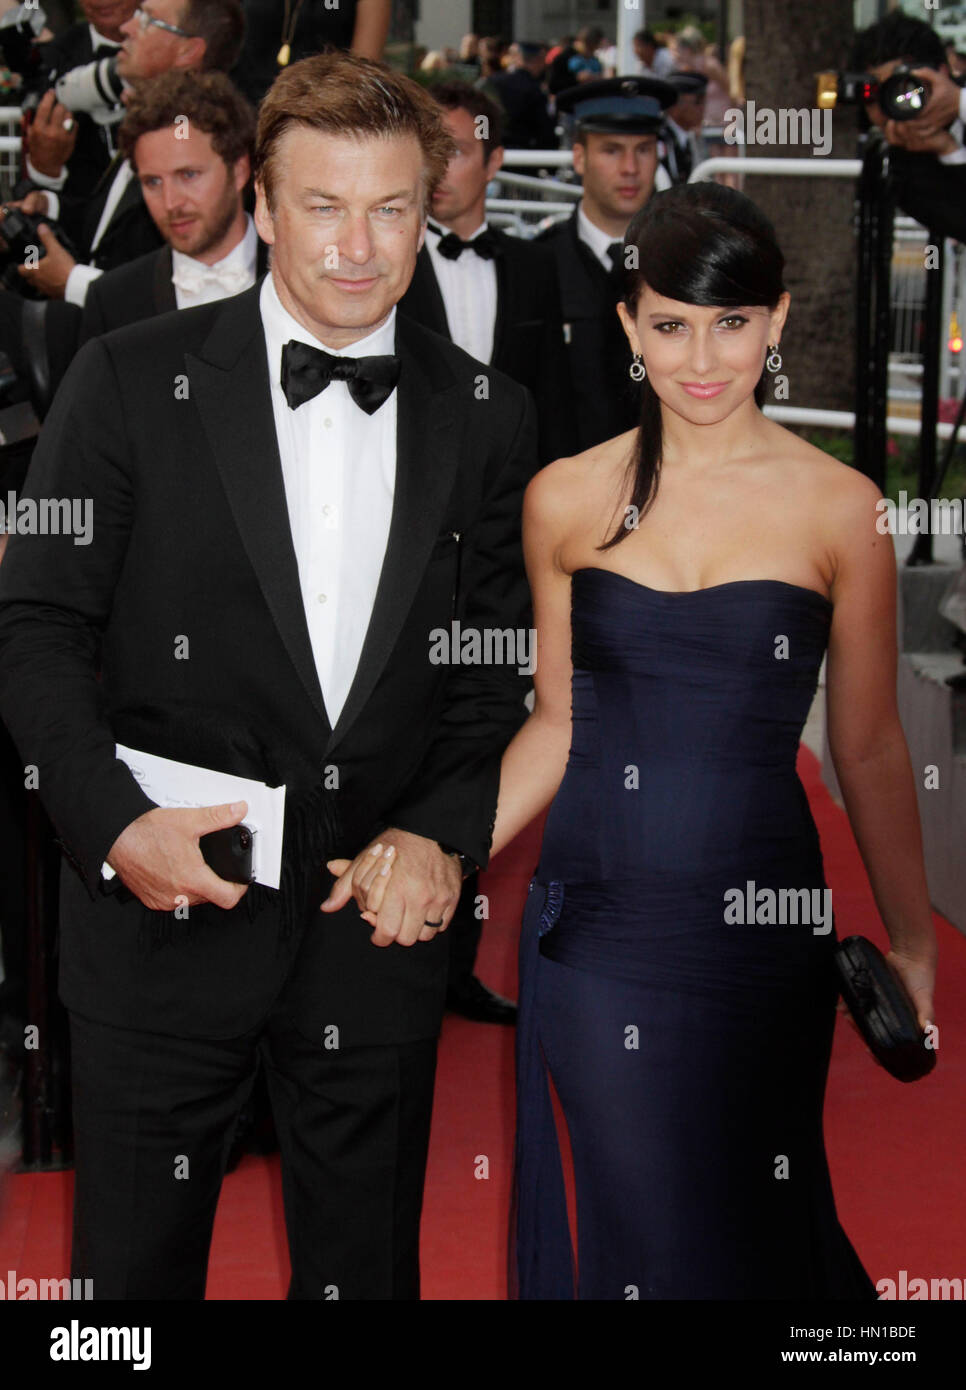 Alec Baldwin and Hilaria Thomas arrive at the premiere for the film, 'Mud' at the 65th Cannes Film Festival in Cannes, France on May 26, 2012. Photo by Francis Specker Stock Photo